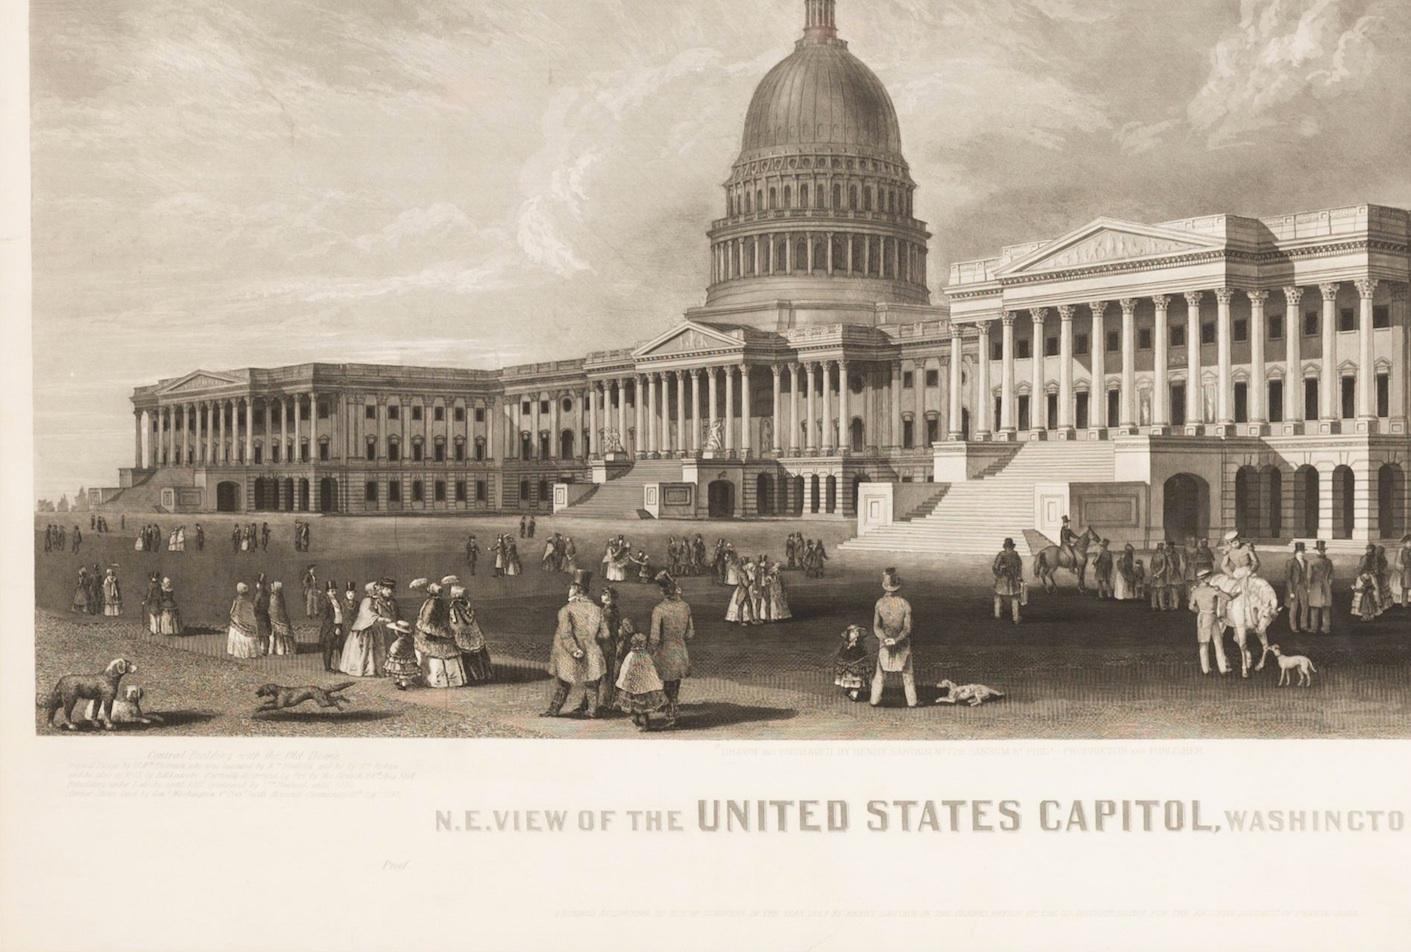 American N.E. View of the United States Capitol, Washington, DC Antique Proof Print 1858 For Sale